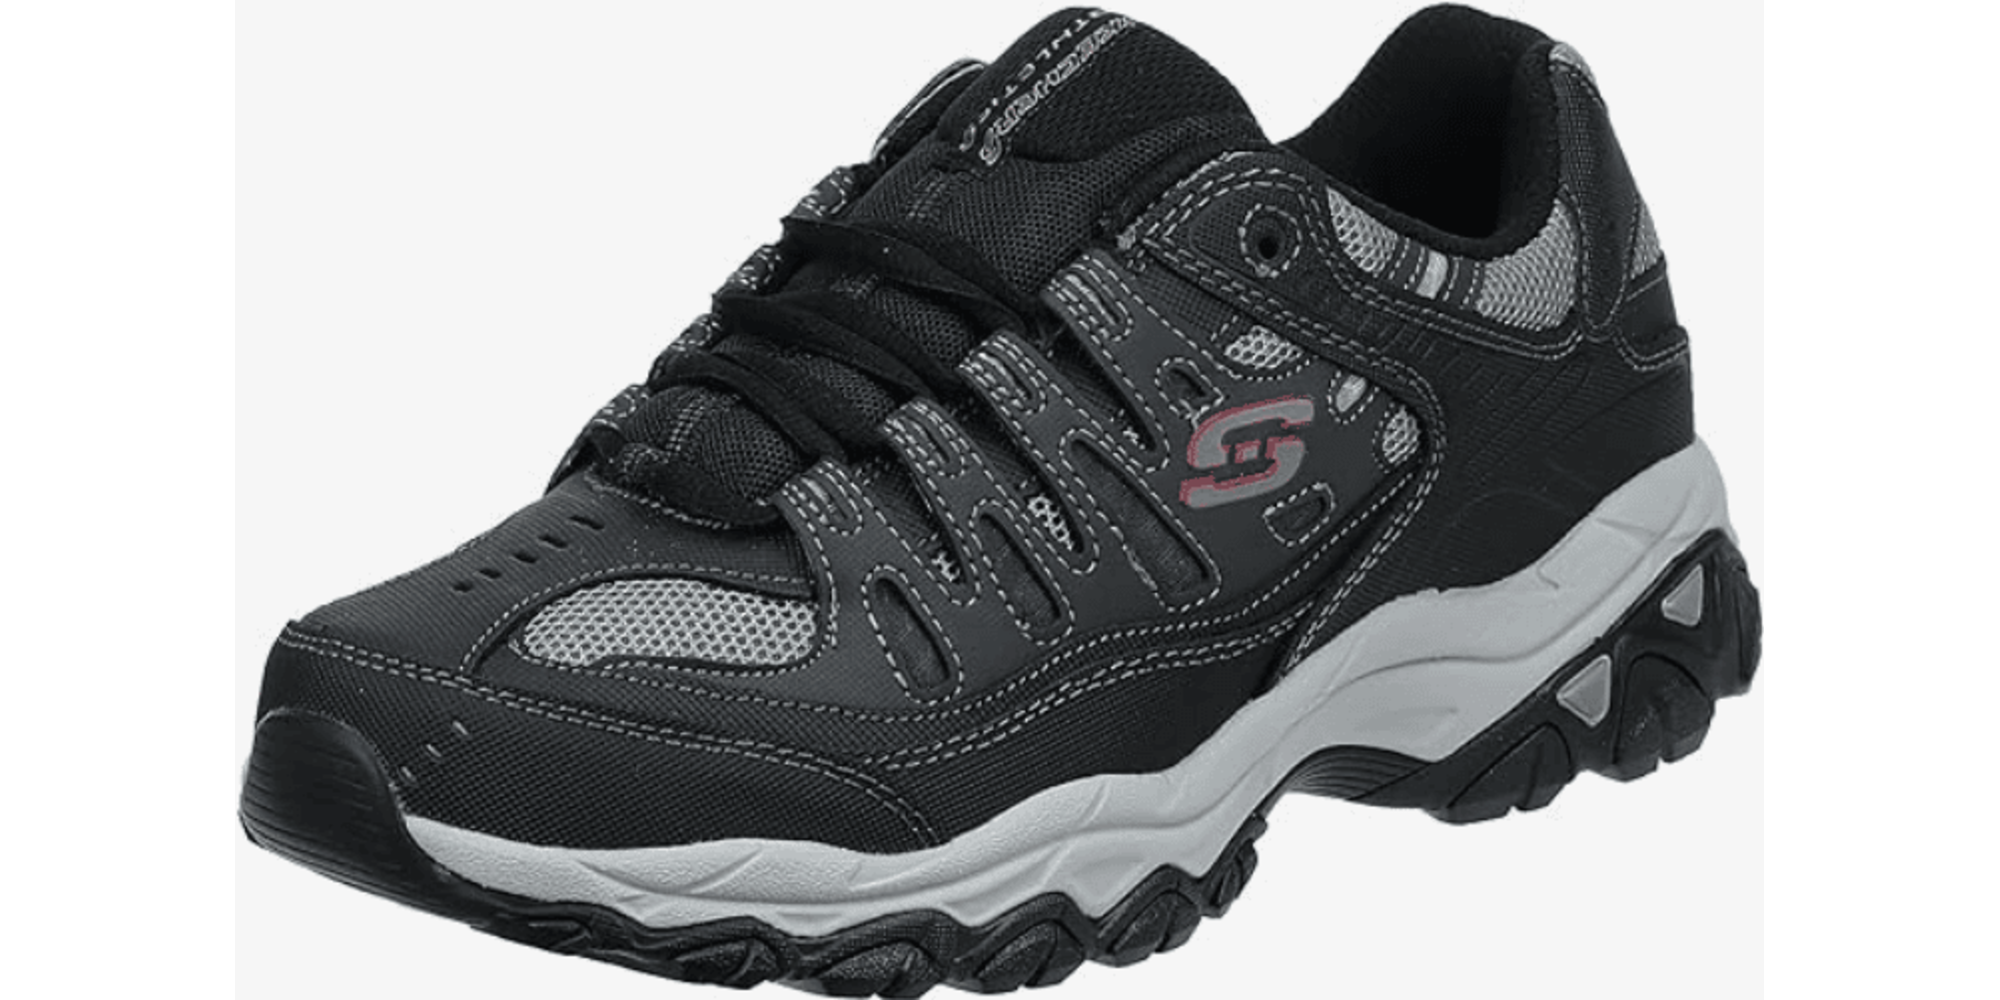 Skechers Afterburn M. Fit Review: Performance Meets Fashion